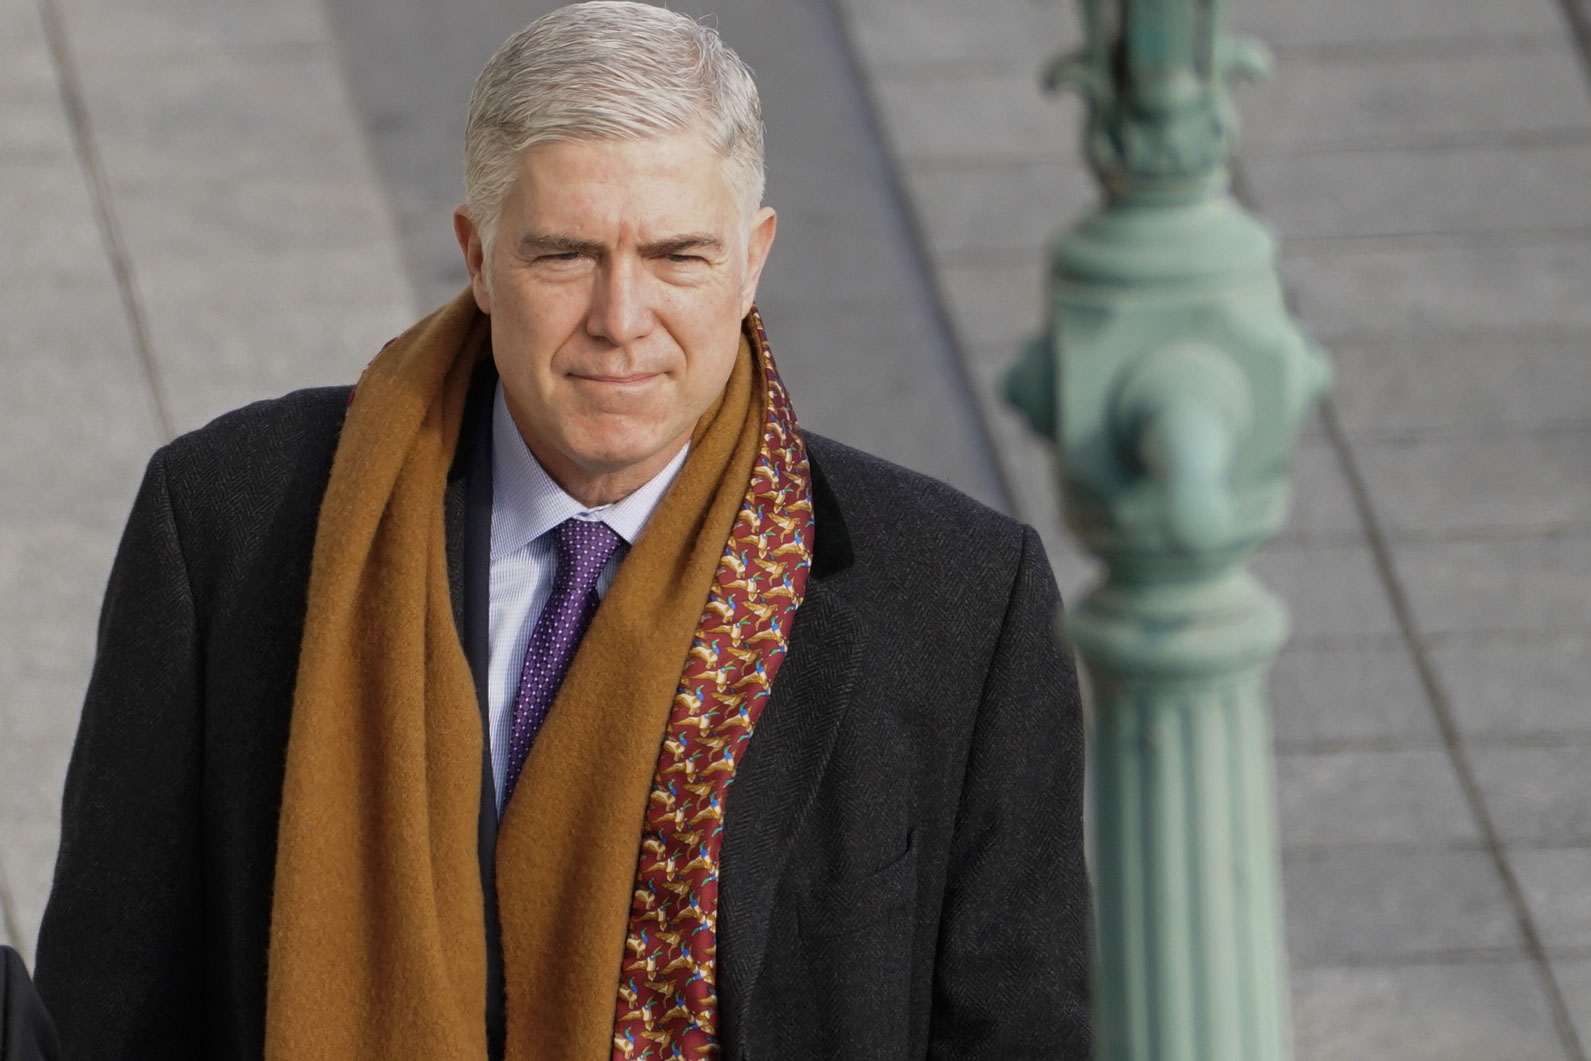 Justice Gorsuch is walking outside on a sunny, cold day, wearing a suit, a heavy overcoat, and a gold-and-red patterned scarf.